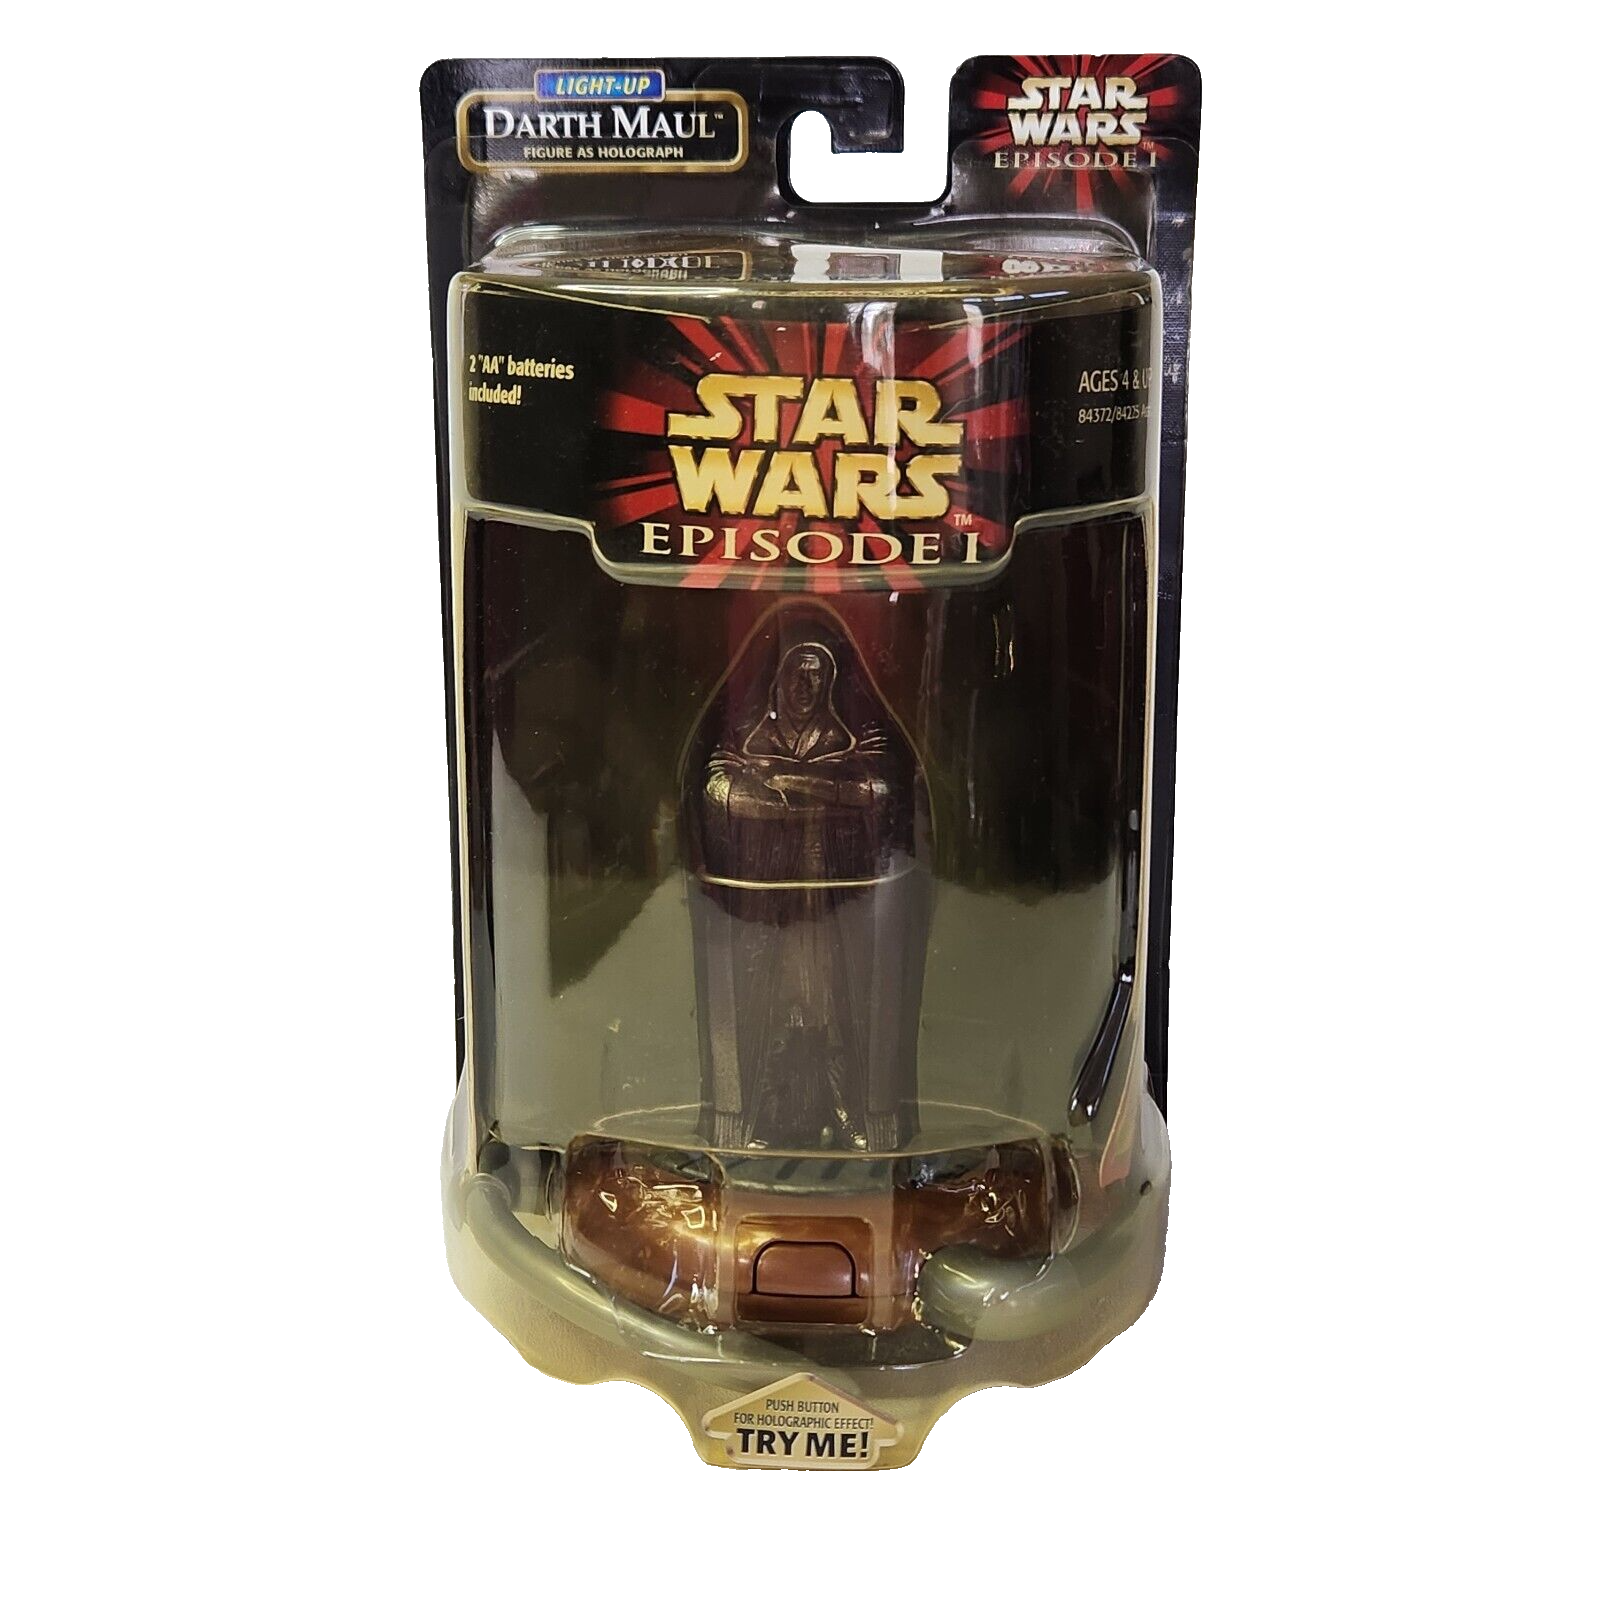 Primary image for VINTAGE 1999 STAR WARS EPISODE 1 LIGHT UP DARTH MAUL FIGURE AS HOLOGRAPH NEW